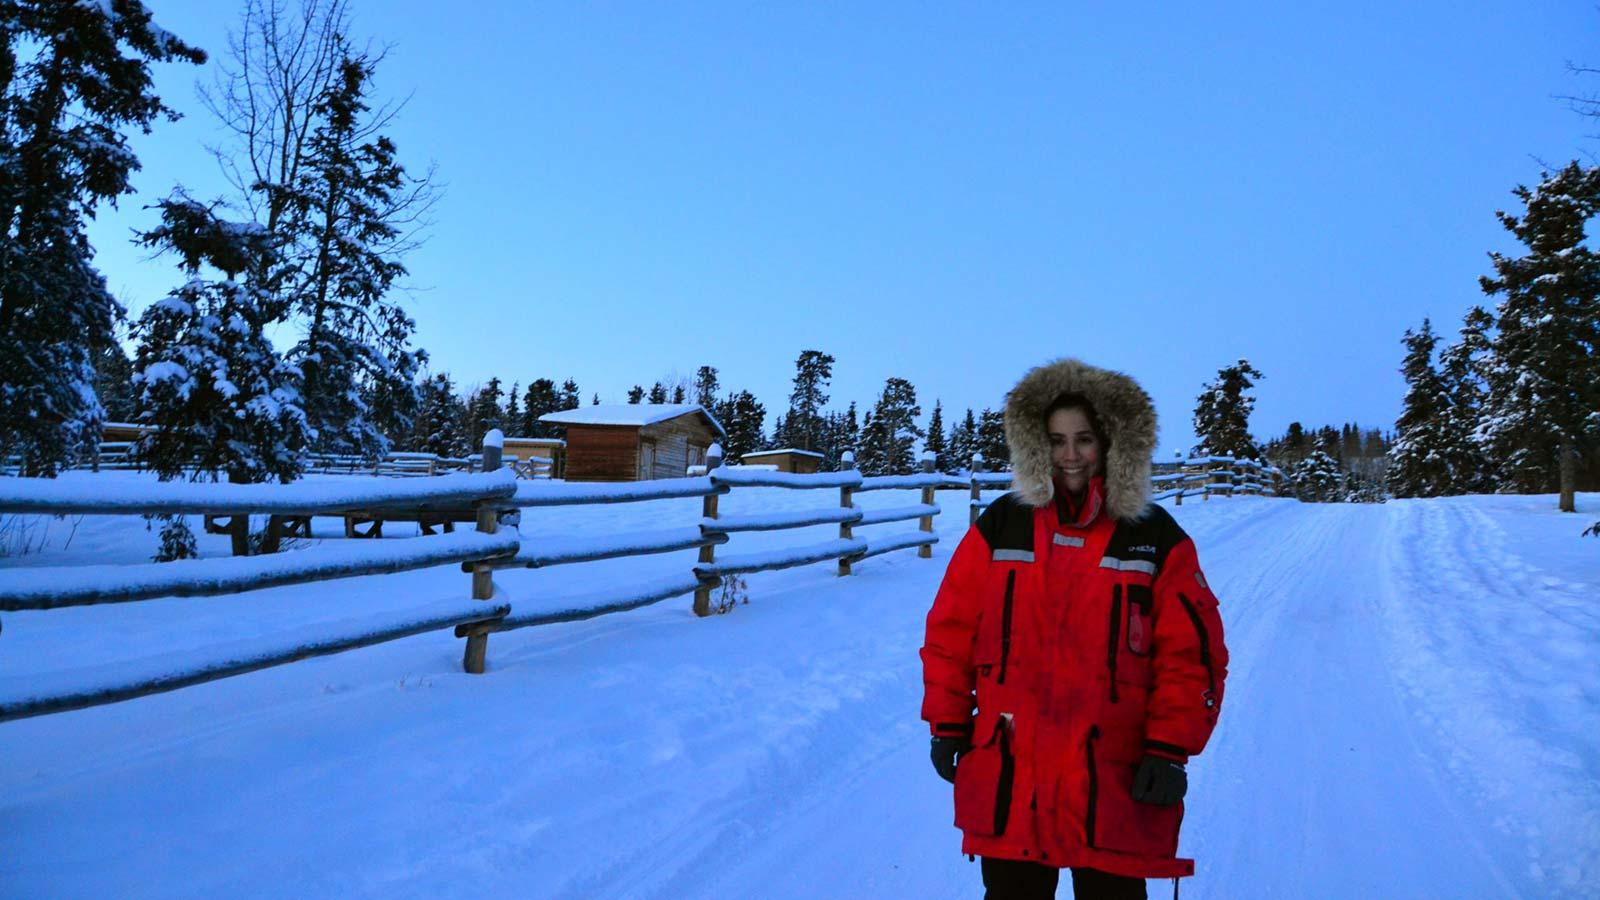 Student in parka in snowy Canadian scene as twilight begins to fall